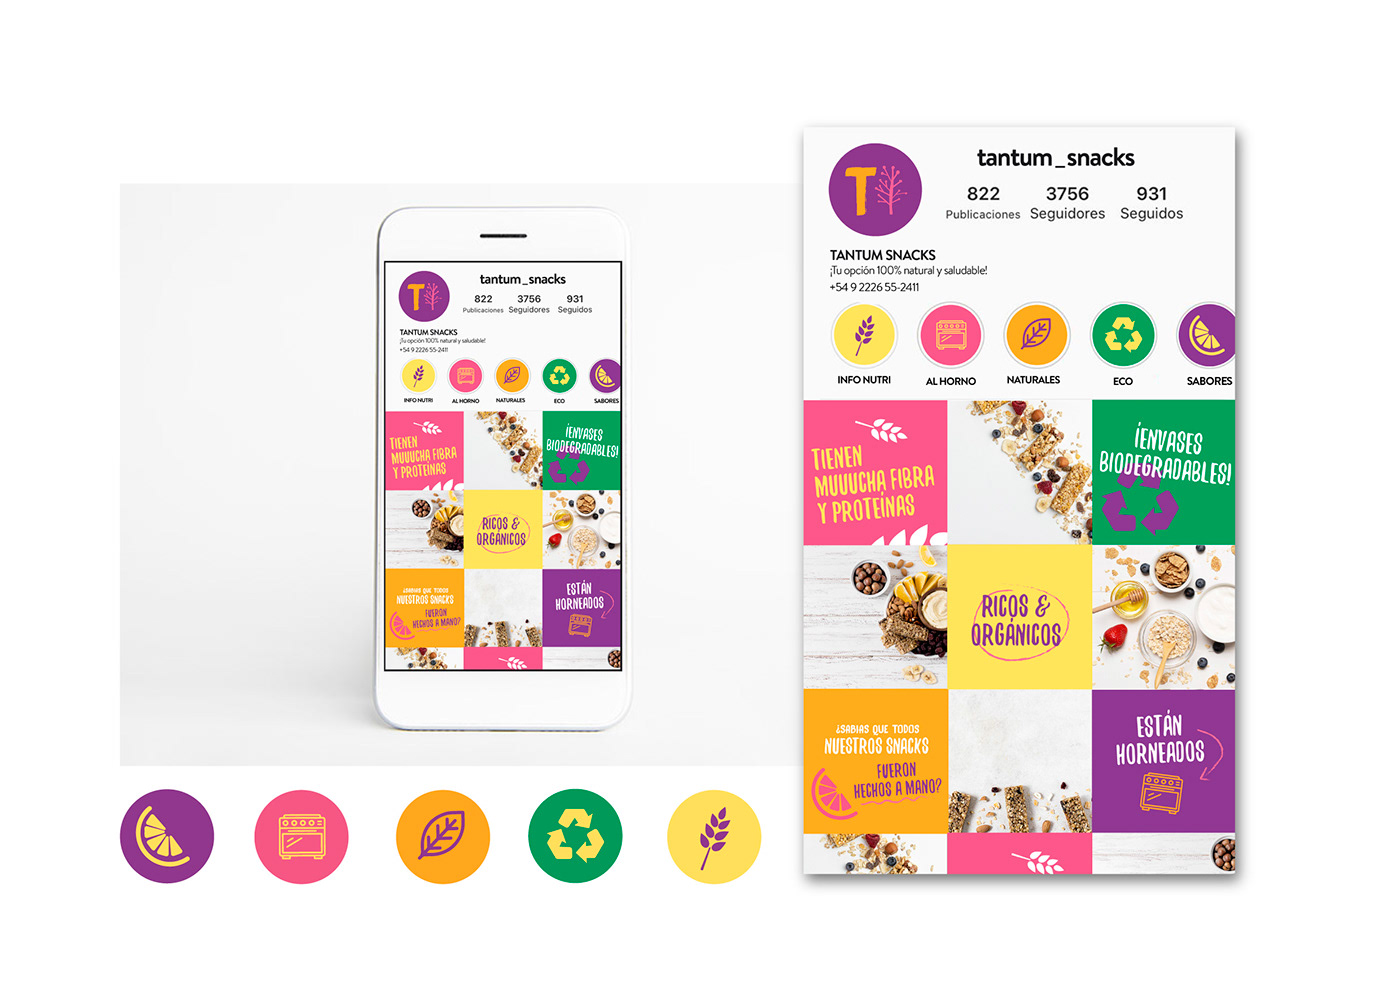 packaging design brand identity Social media post Graphic Designer snack packaging saludable healthy natural identity